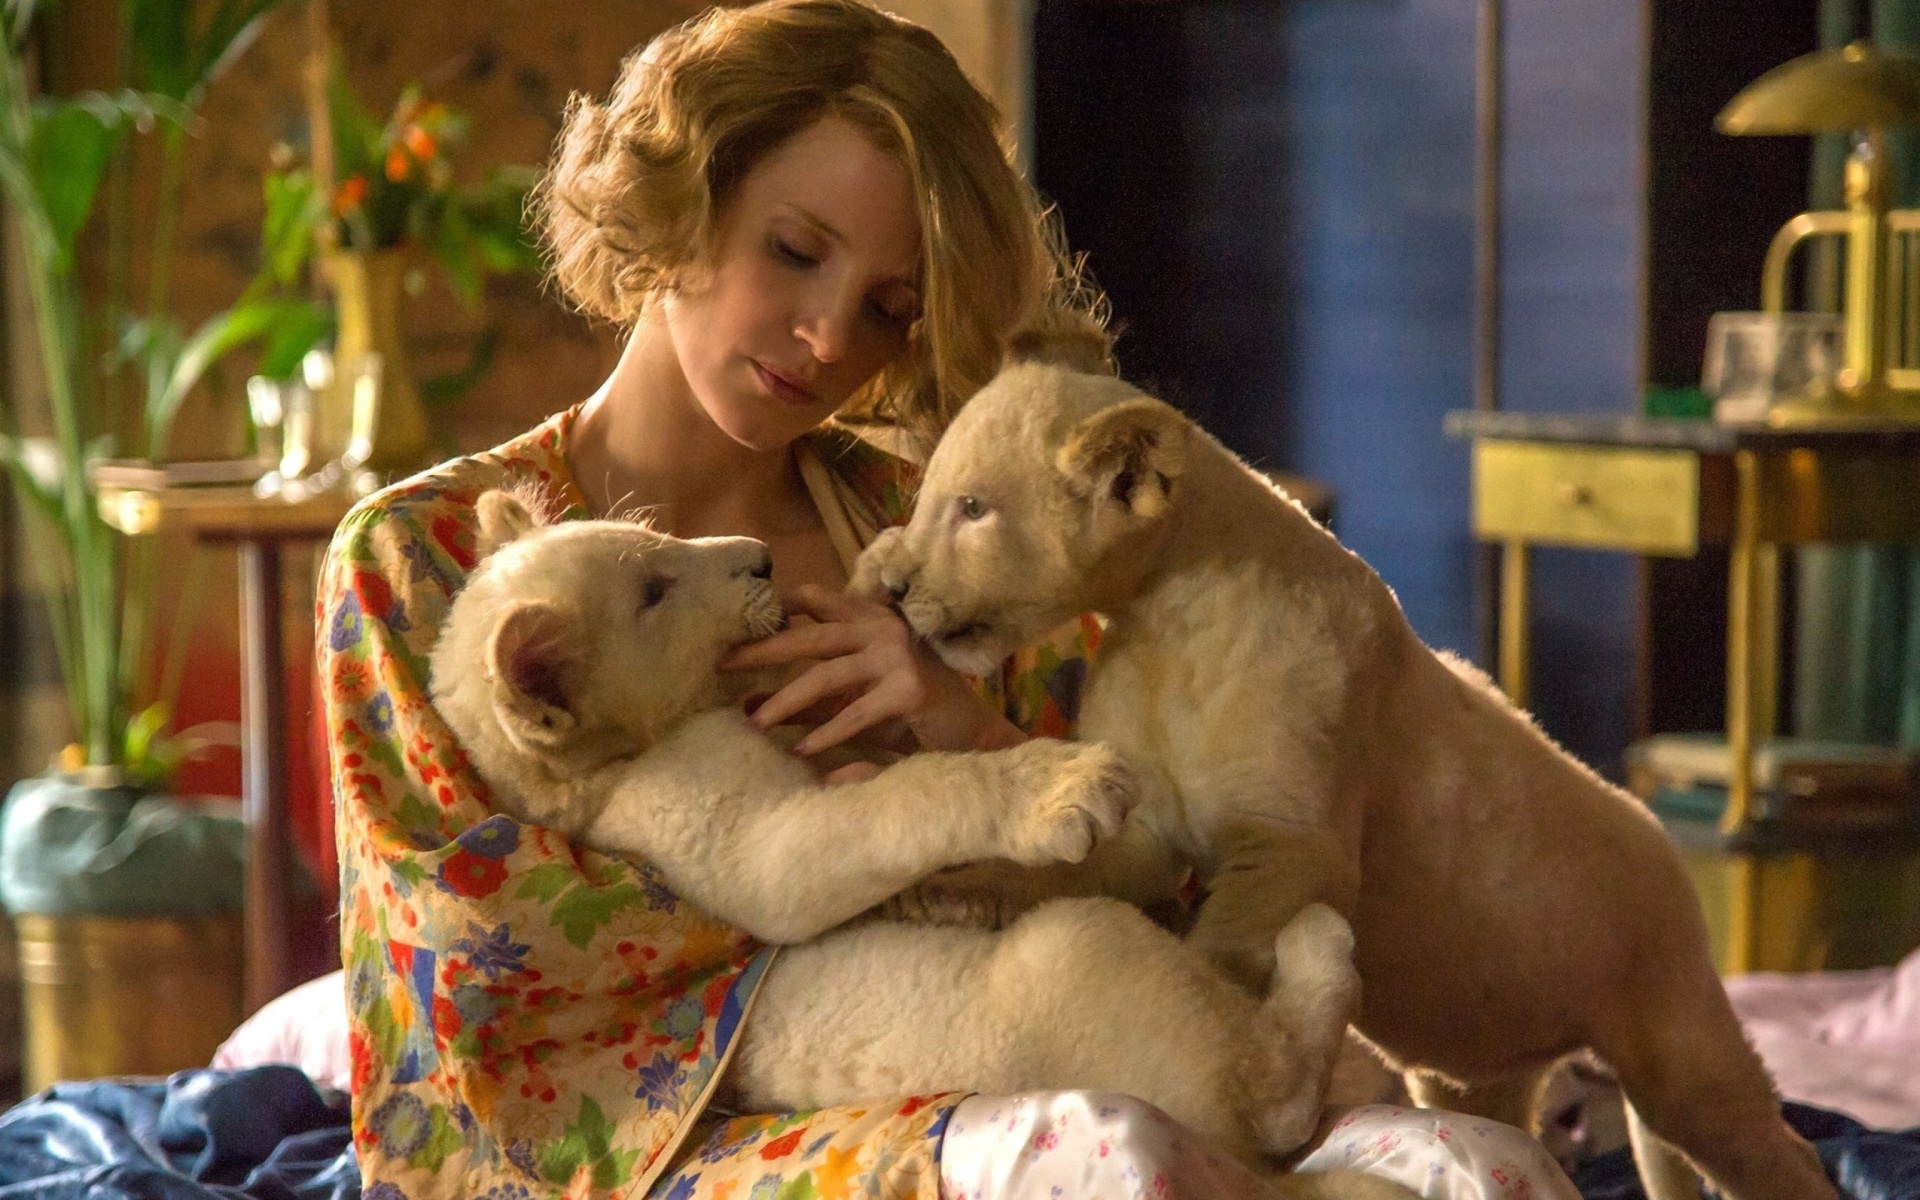 The Zookeepers Wife Film with Jessica Chastain wallpaper 1920x1200